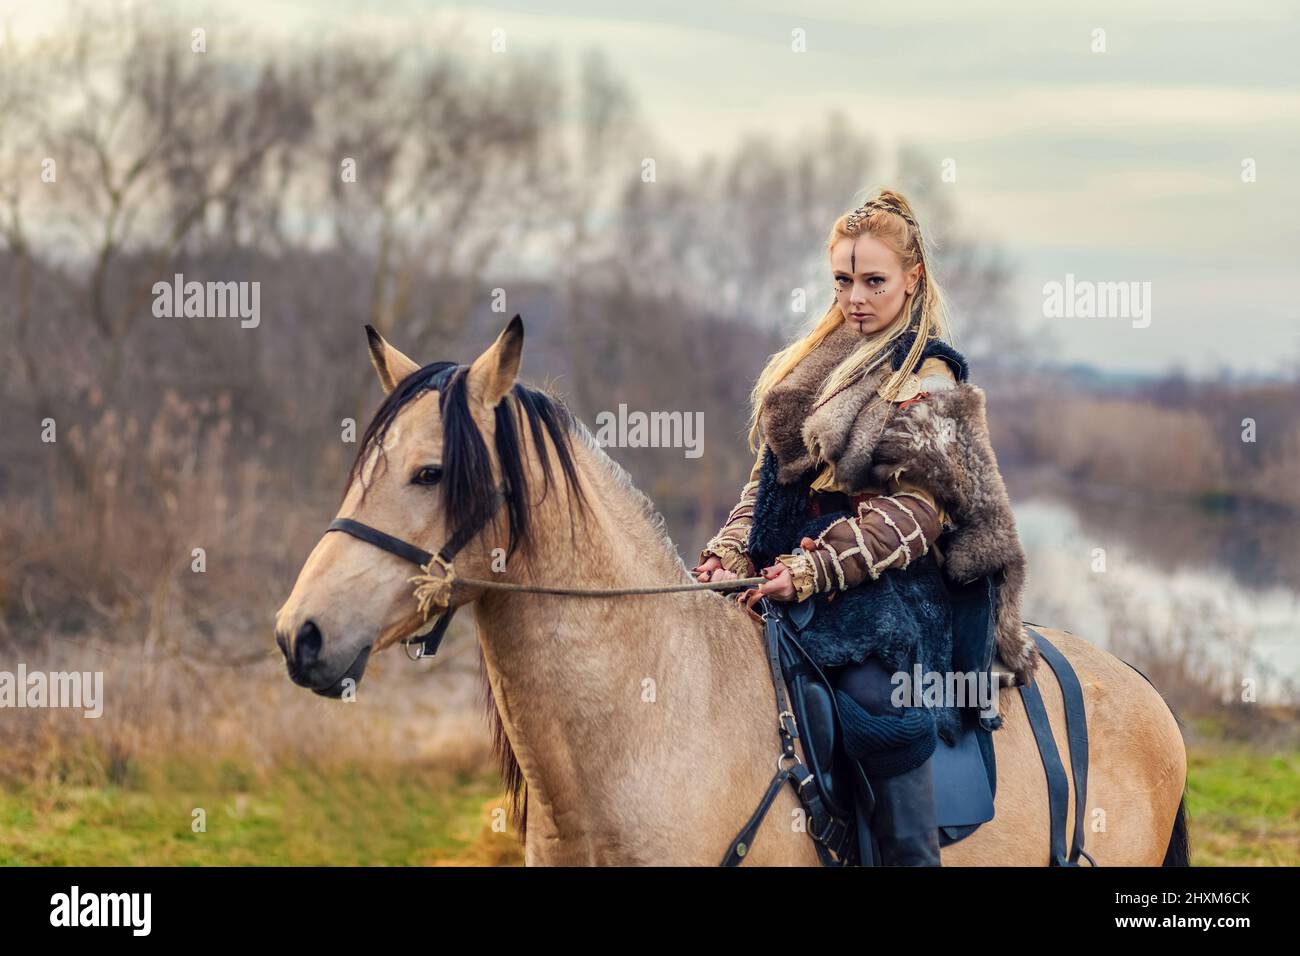 Portrait of beautiful viking woman warrior with painted face and braids riding horse in forest Stock Photo